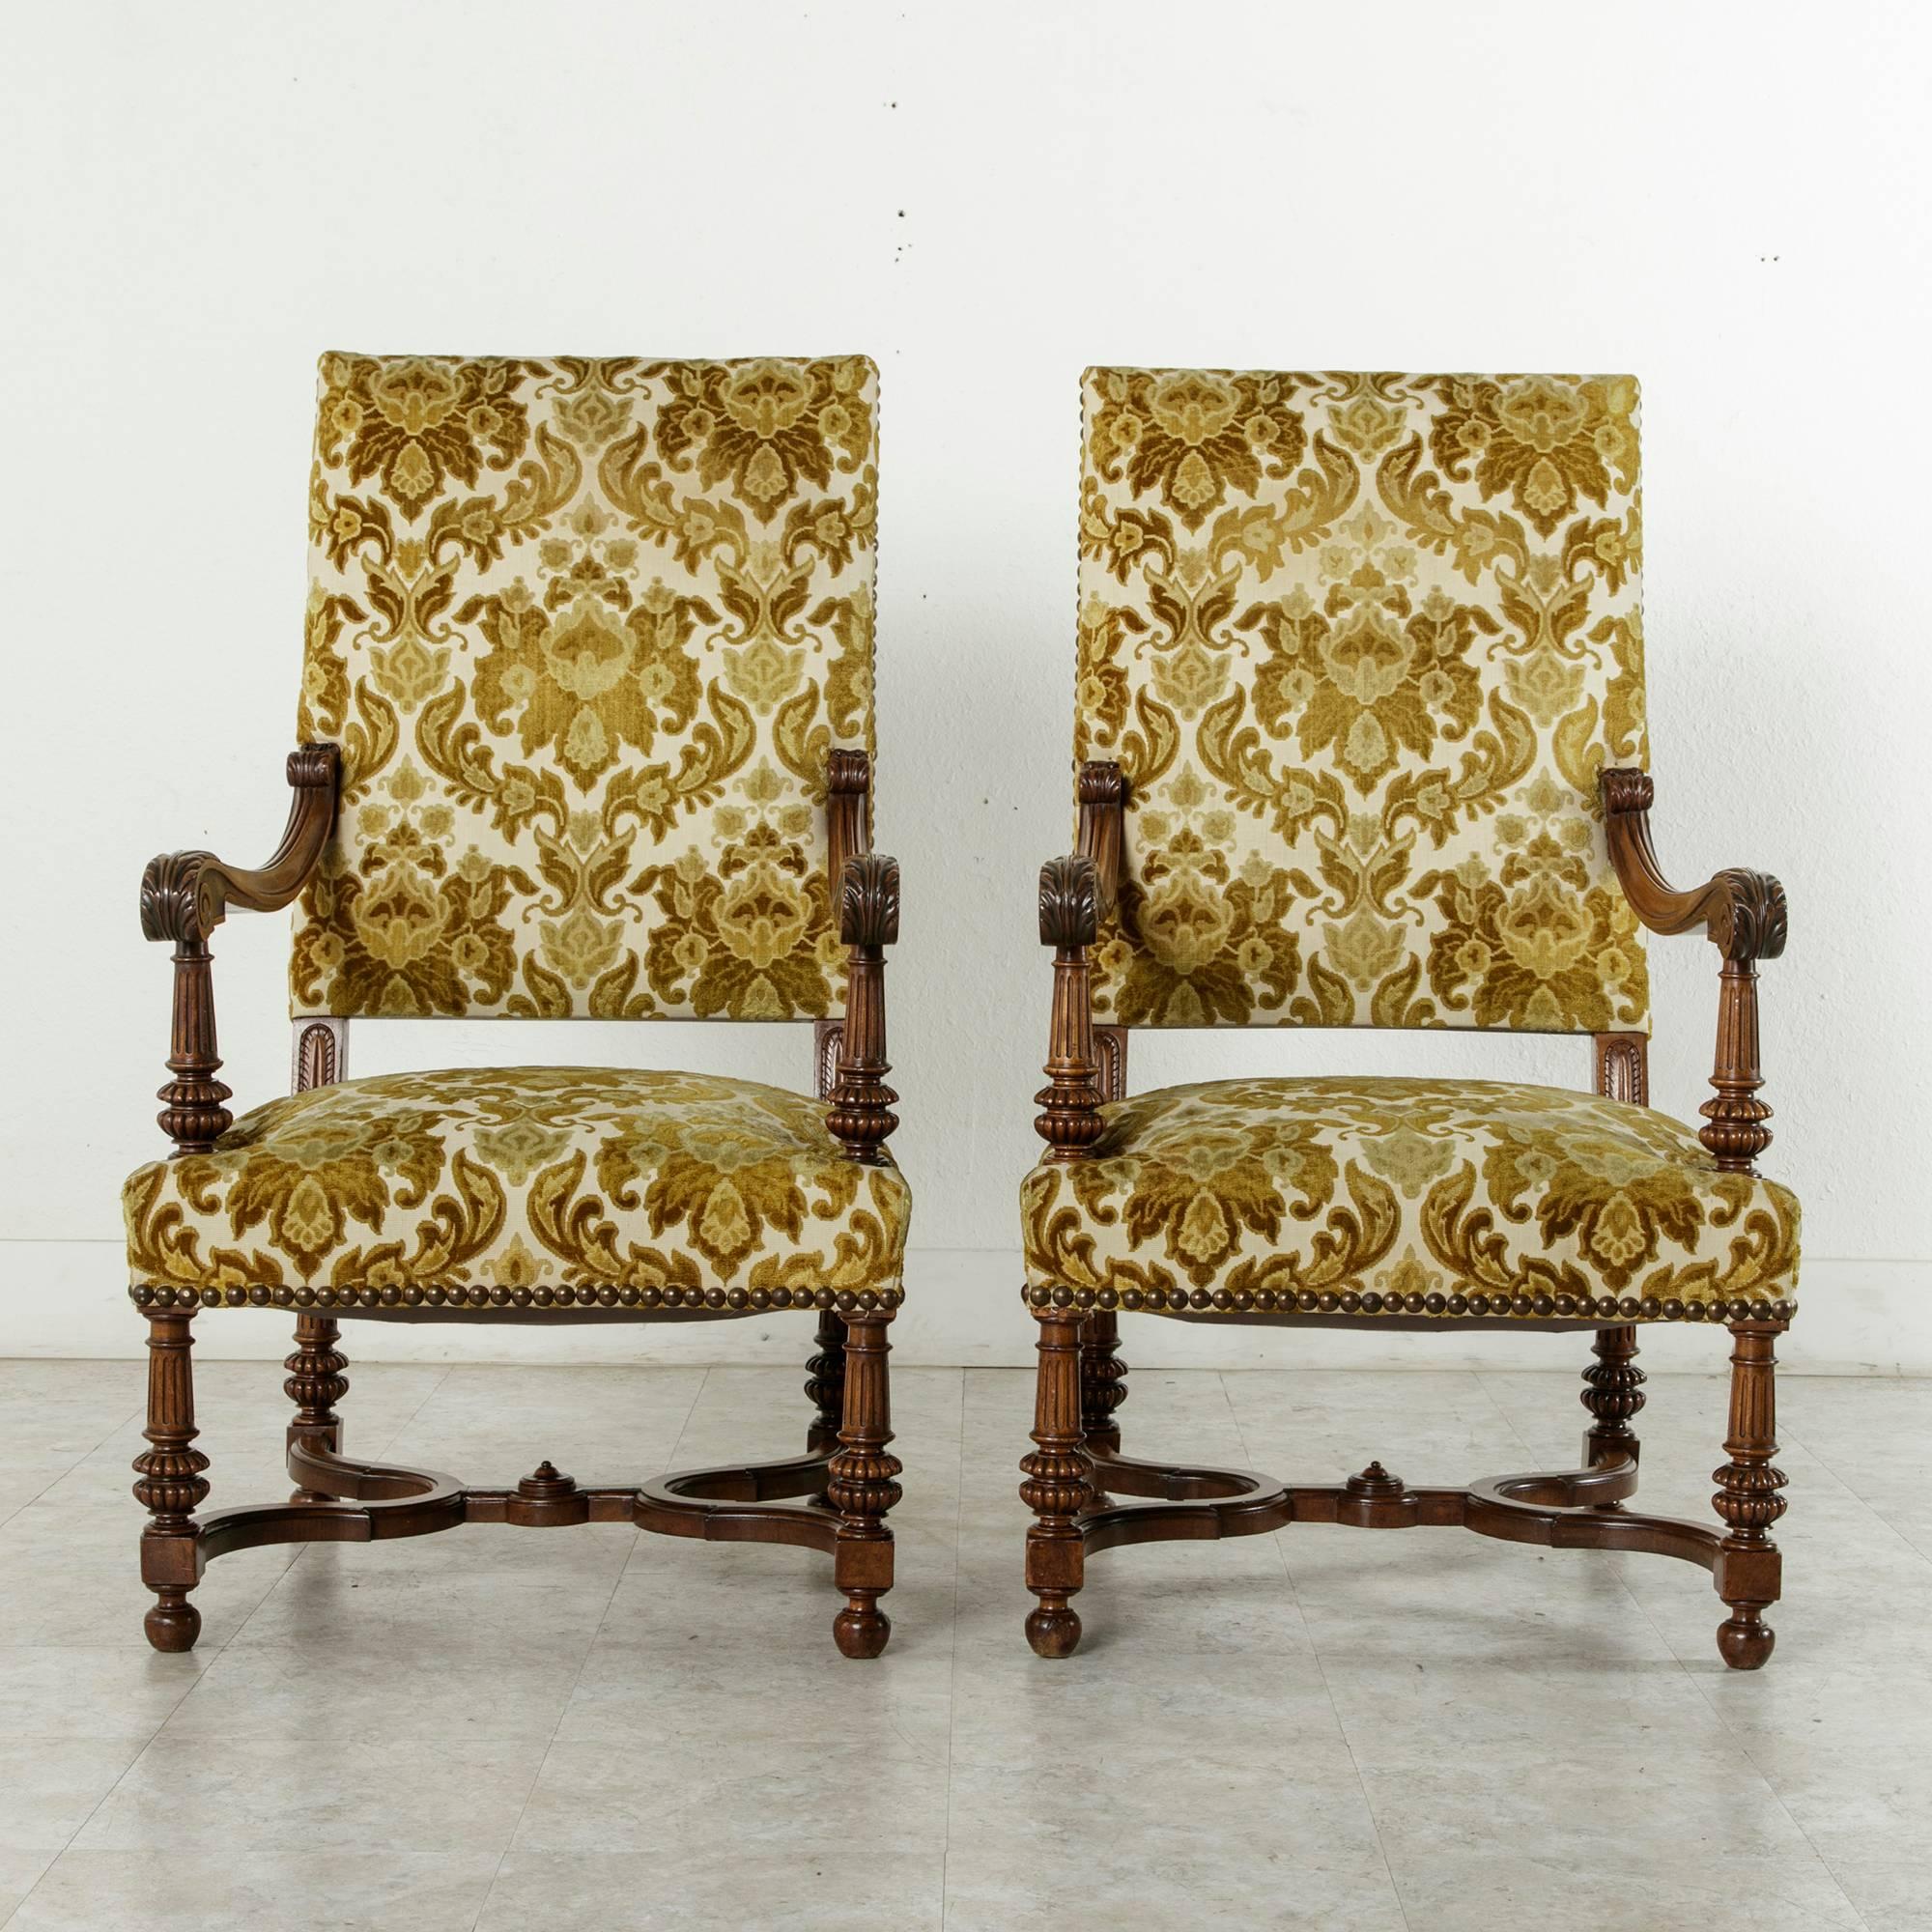 This pair of large-scale French walnut Louis XIV style armchairs from the late nineteenth century feature hand carvings of scrolling acanthus leaves on the armrests which are supported by fluted columns. Additional leaf carvings adorn the supports